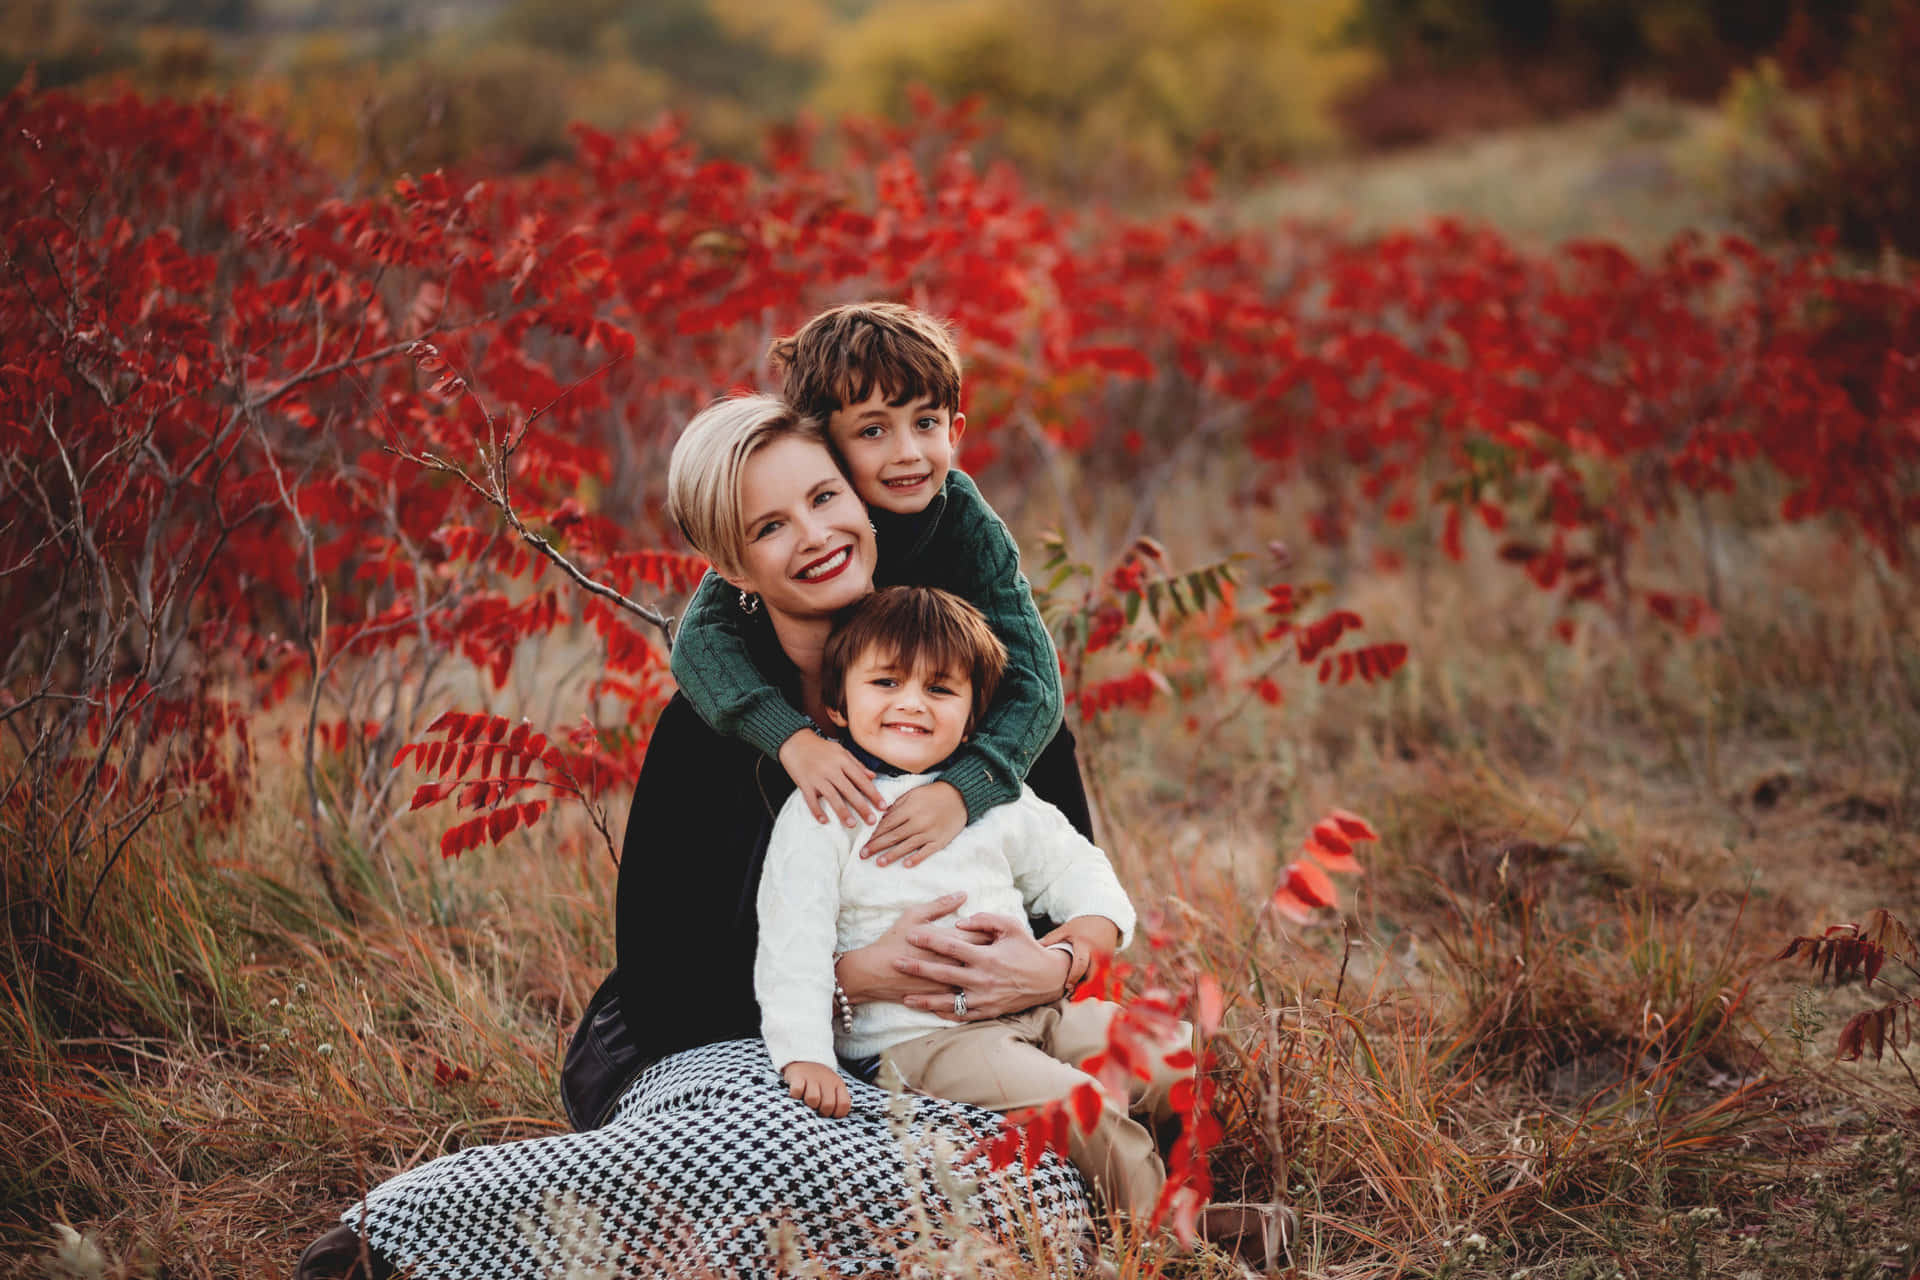 Embrace the spirit of fall with your loving family